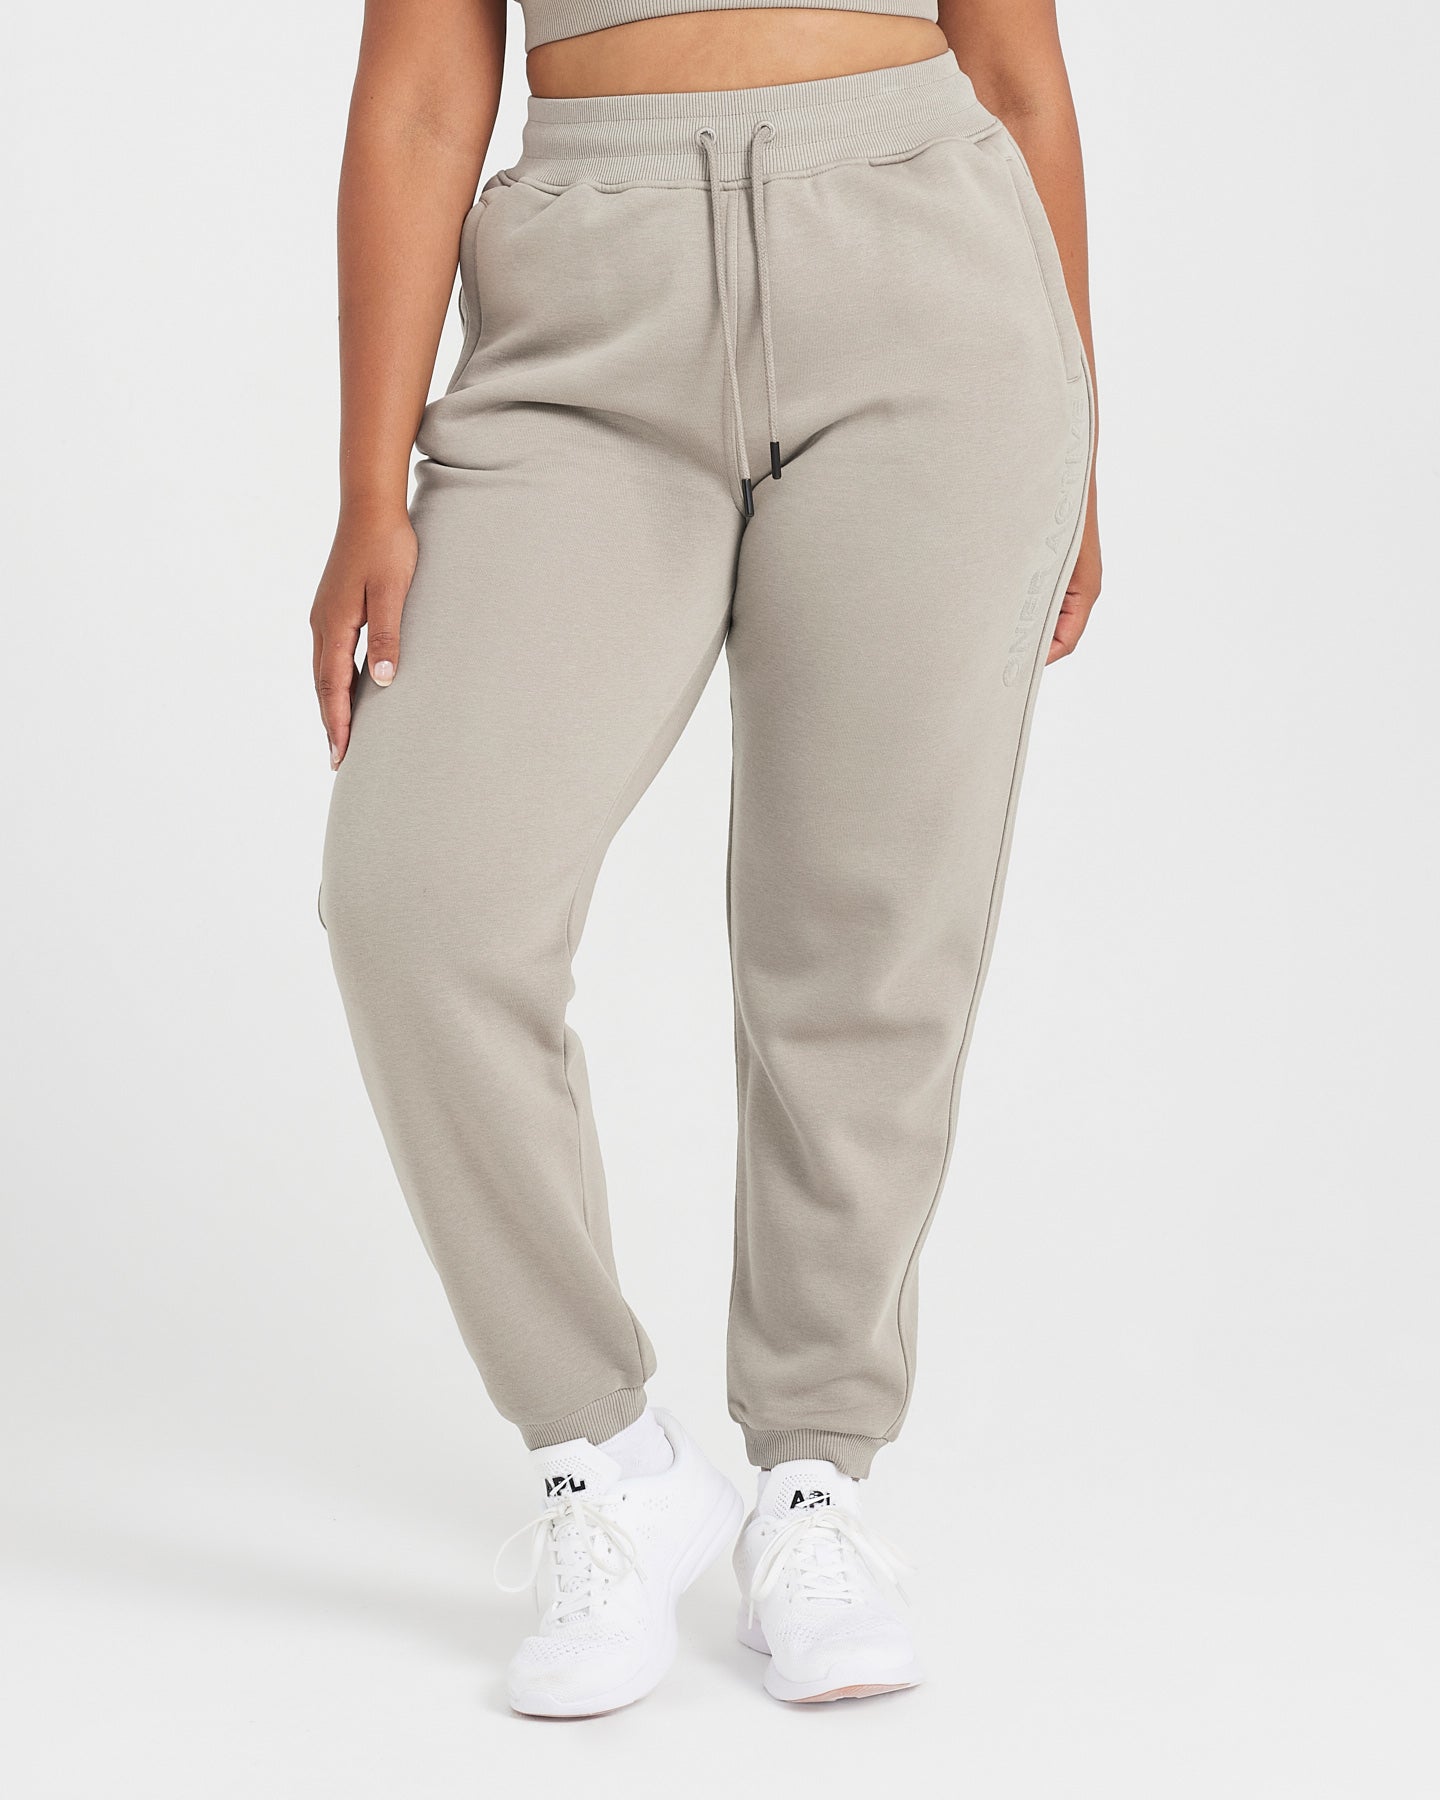 COMFY JOGGER for WOMEN - Warm Sand | Oner Active US